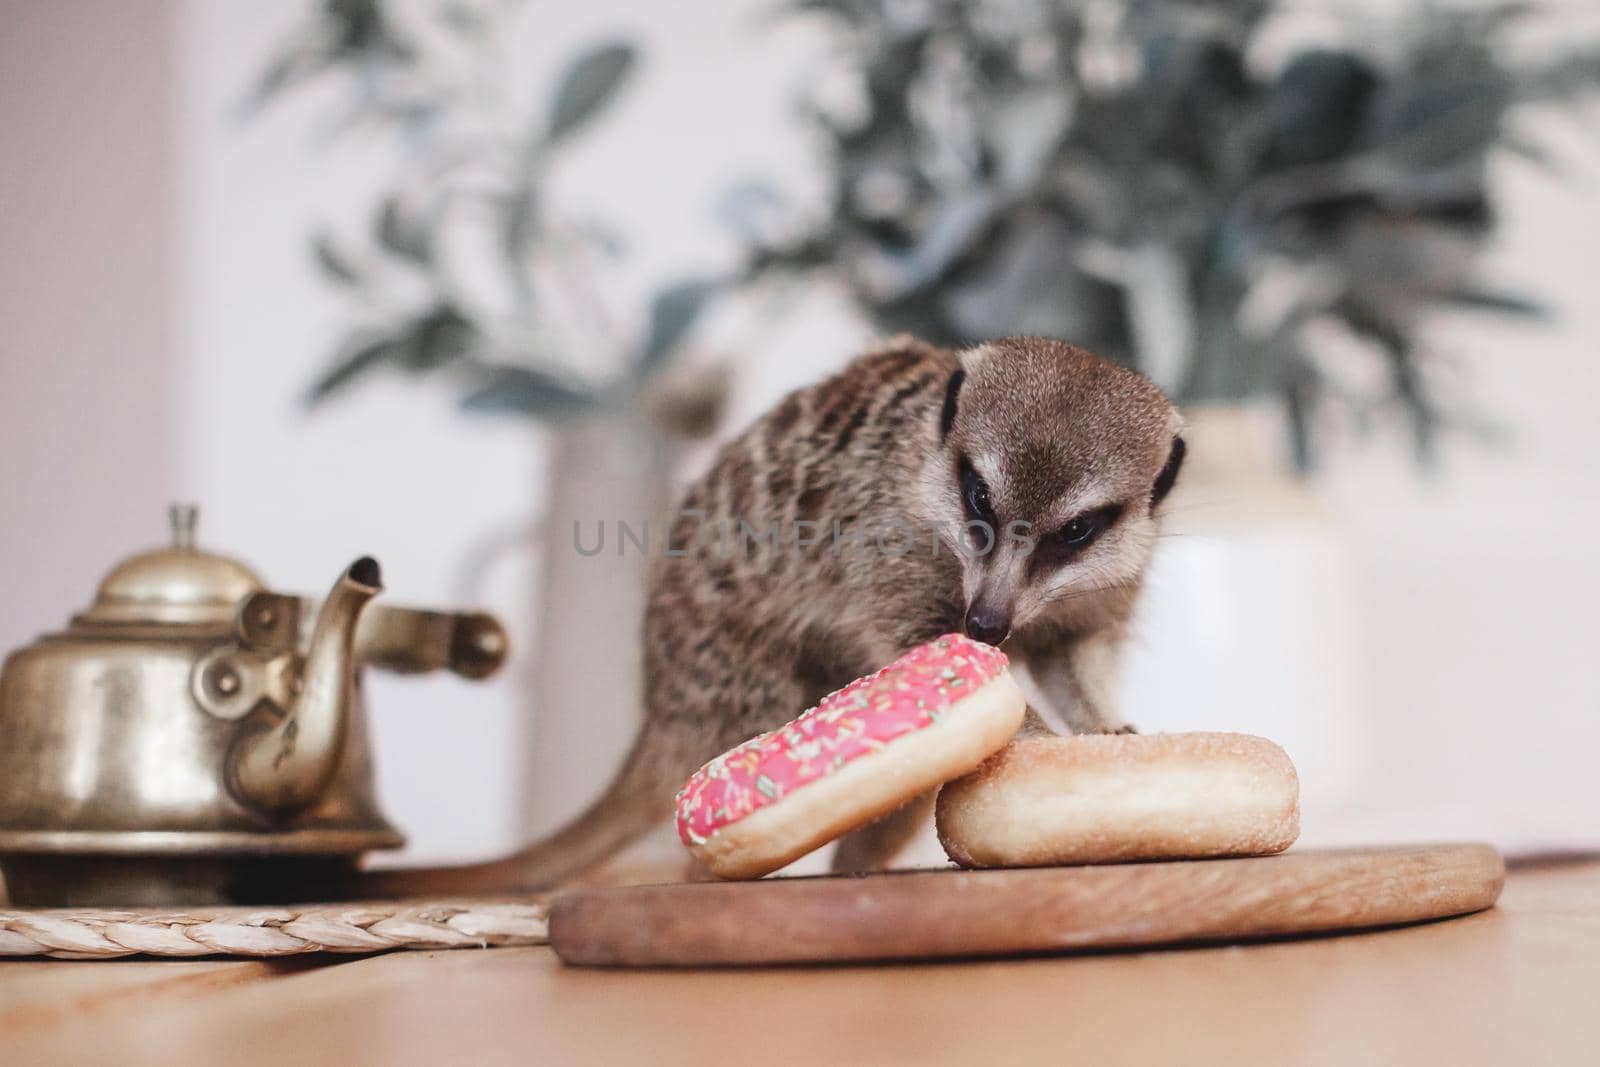 The meerkat or suricate eating sweets and donuts by RosaJay